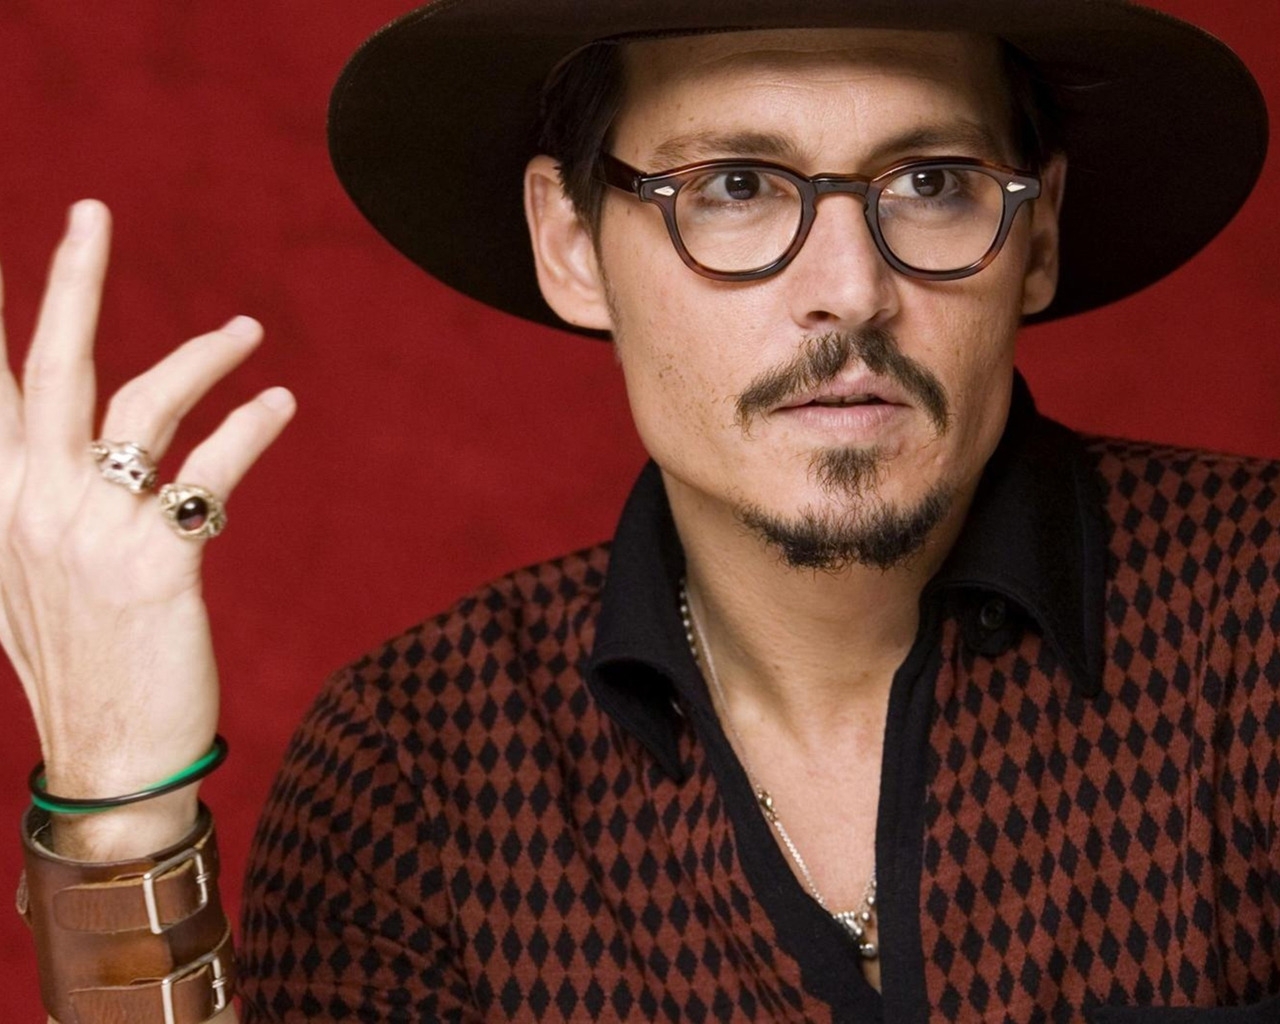 Johnny Depp with Glasses for 1280 x 1024 resolution